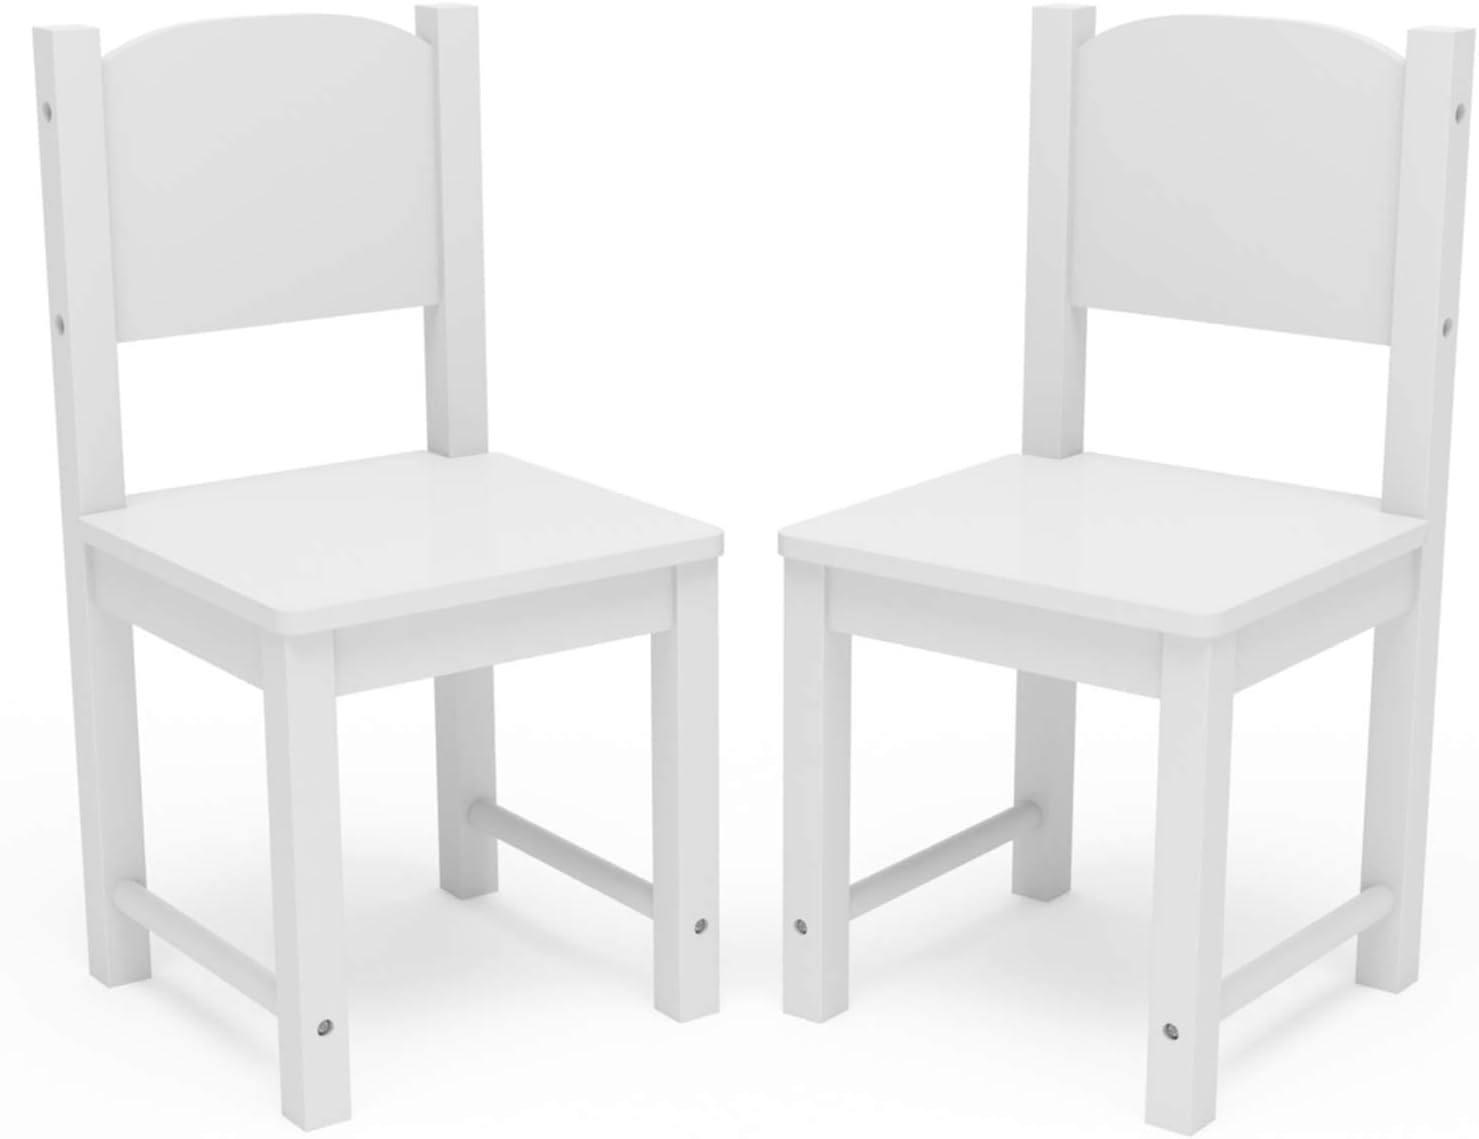 Timy Toddler Wooden Chair Pair, Kids Furniture for Eating, Reading, Playing 2 Pack (White)